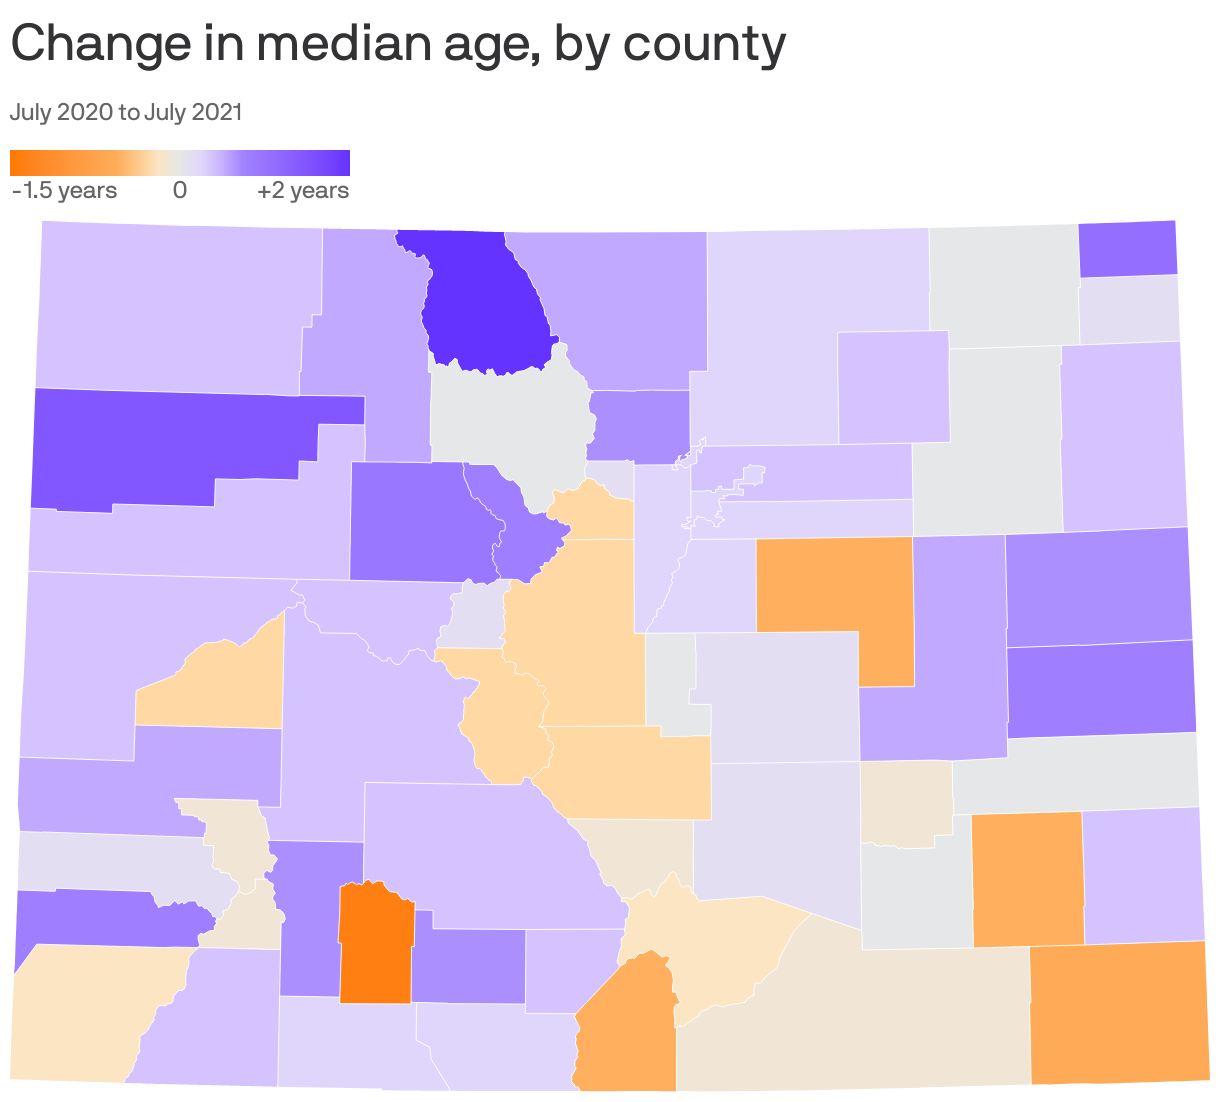 Change in median age, by county